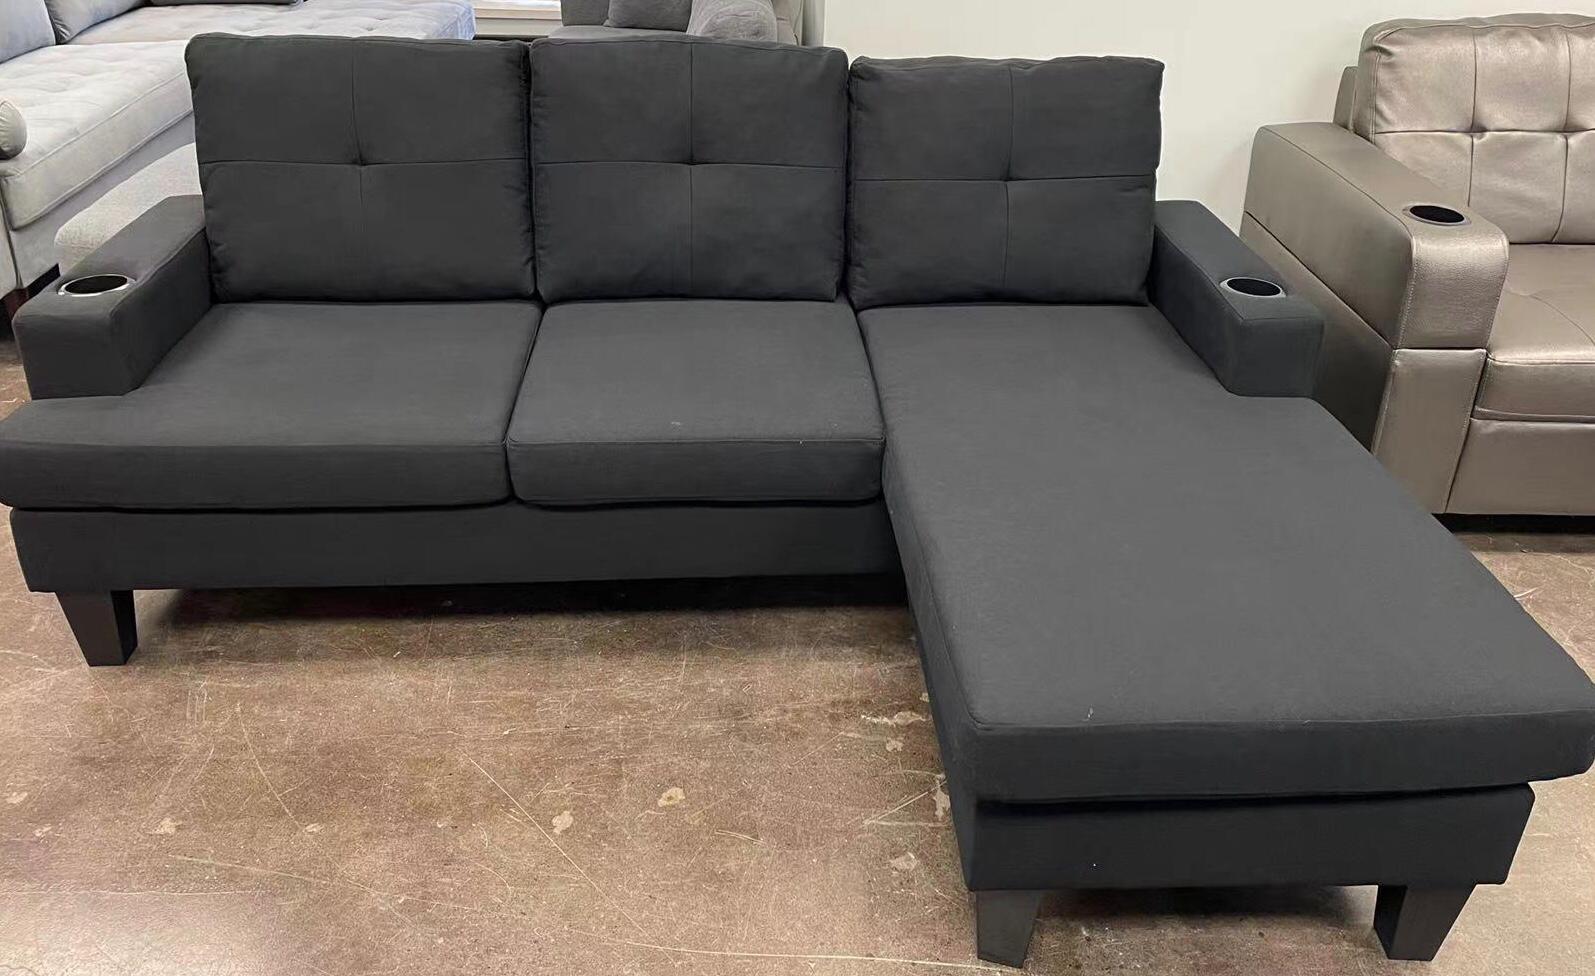 Black Fabric Sectional Sofa with Cup holder 2020